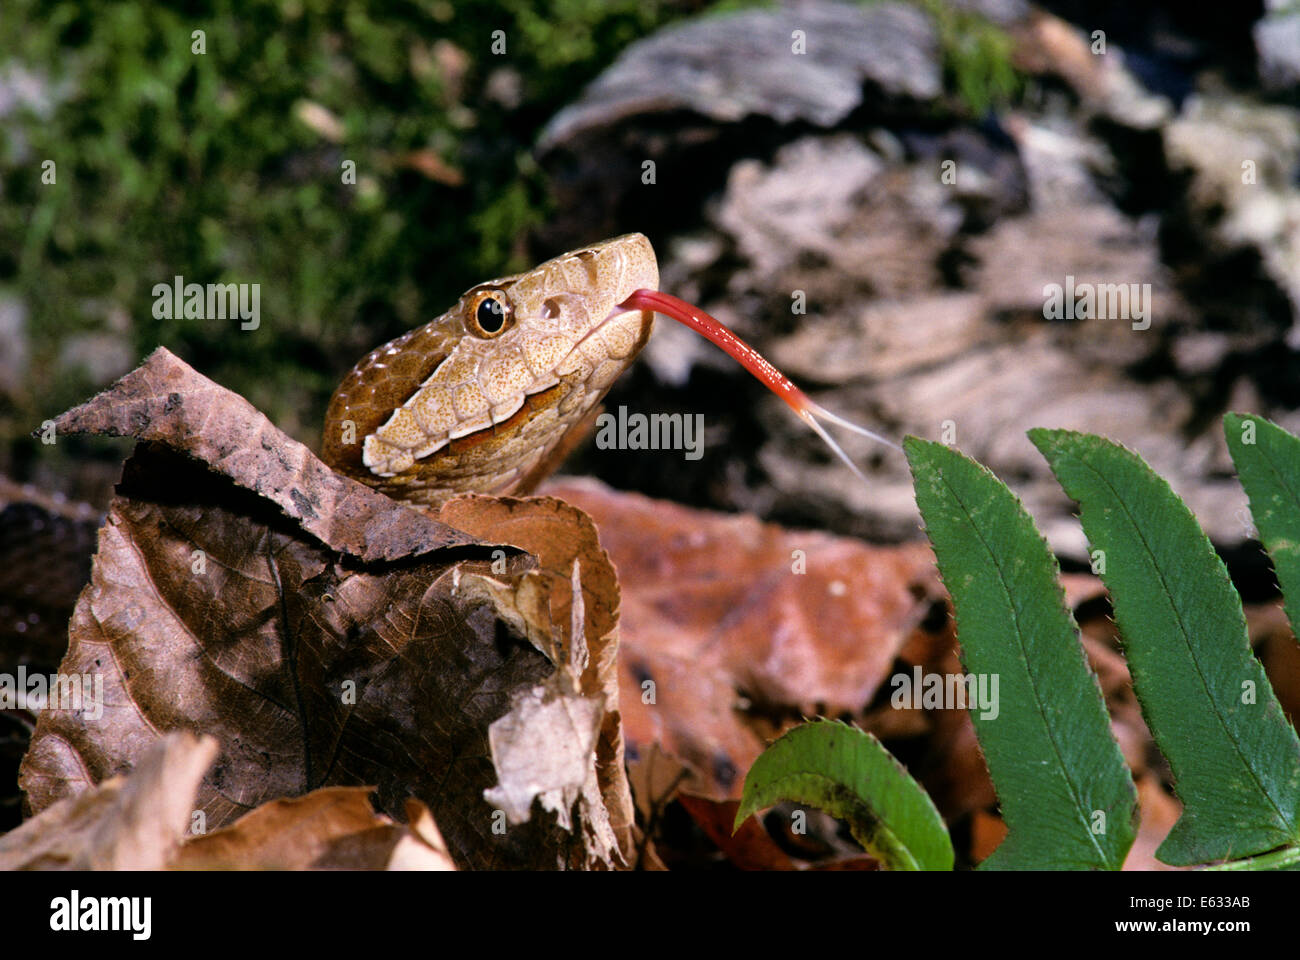 HEAD OF BROAD-BANDED COPPERHEAD PIT VIPER Agkistrodon contortrix laticinctus LOOKING AT CAMERA EAST OKLAHOMA USA Stock Photo